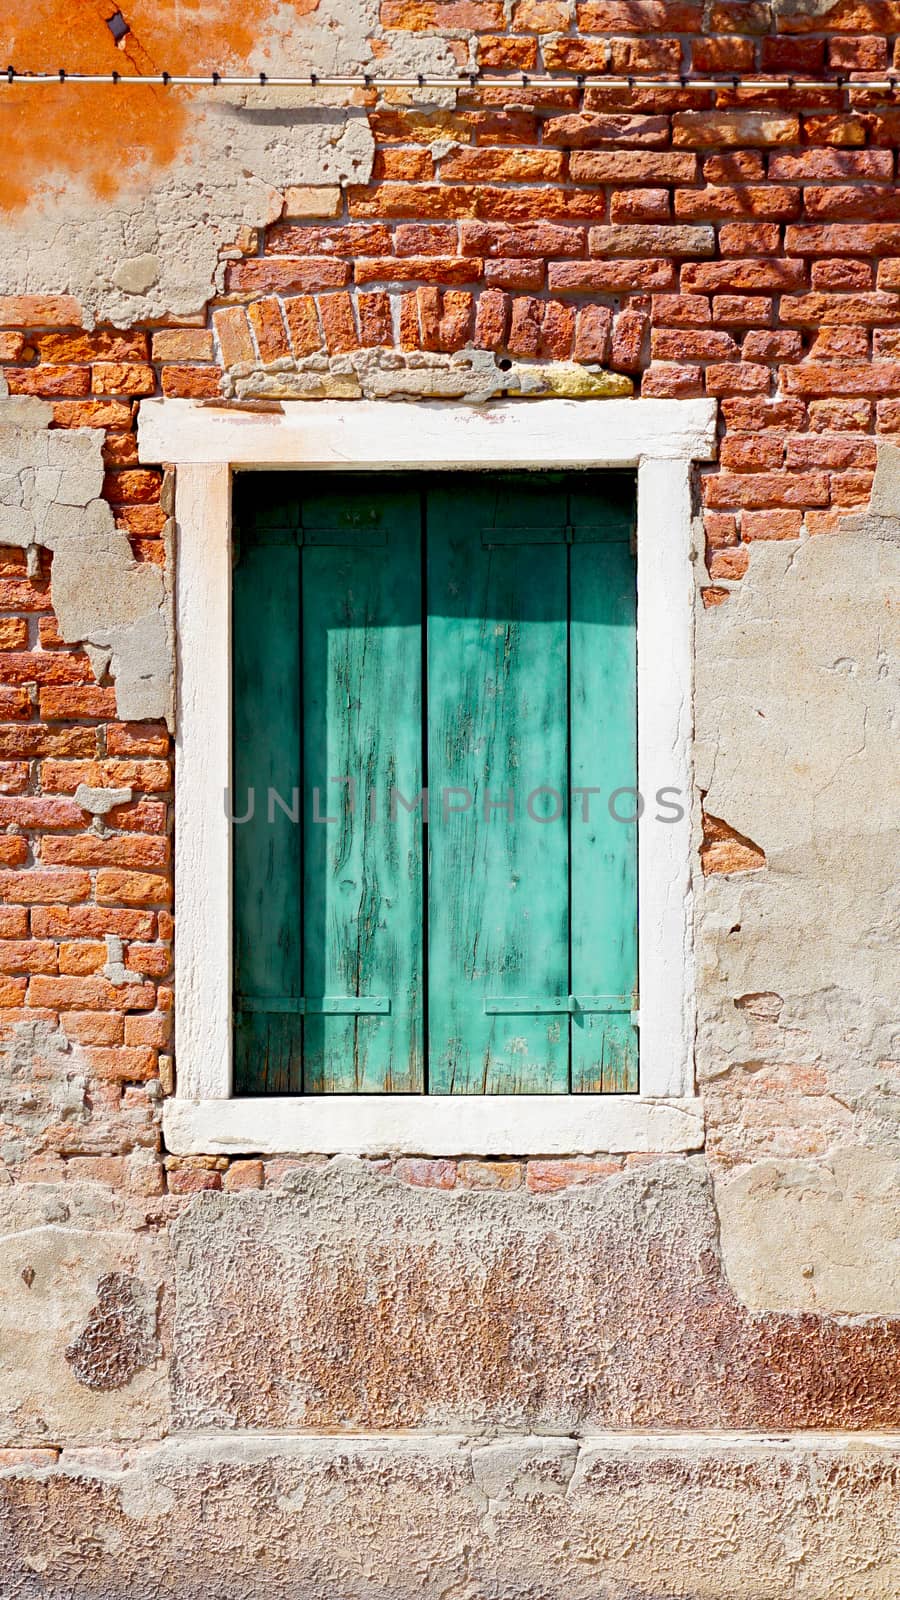 window and ancient decay wall building architecture in Murano, Venice, Italy